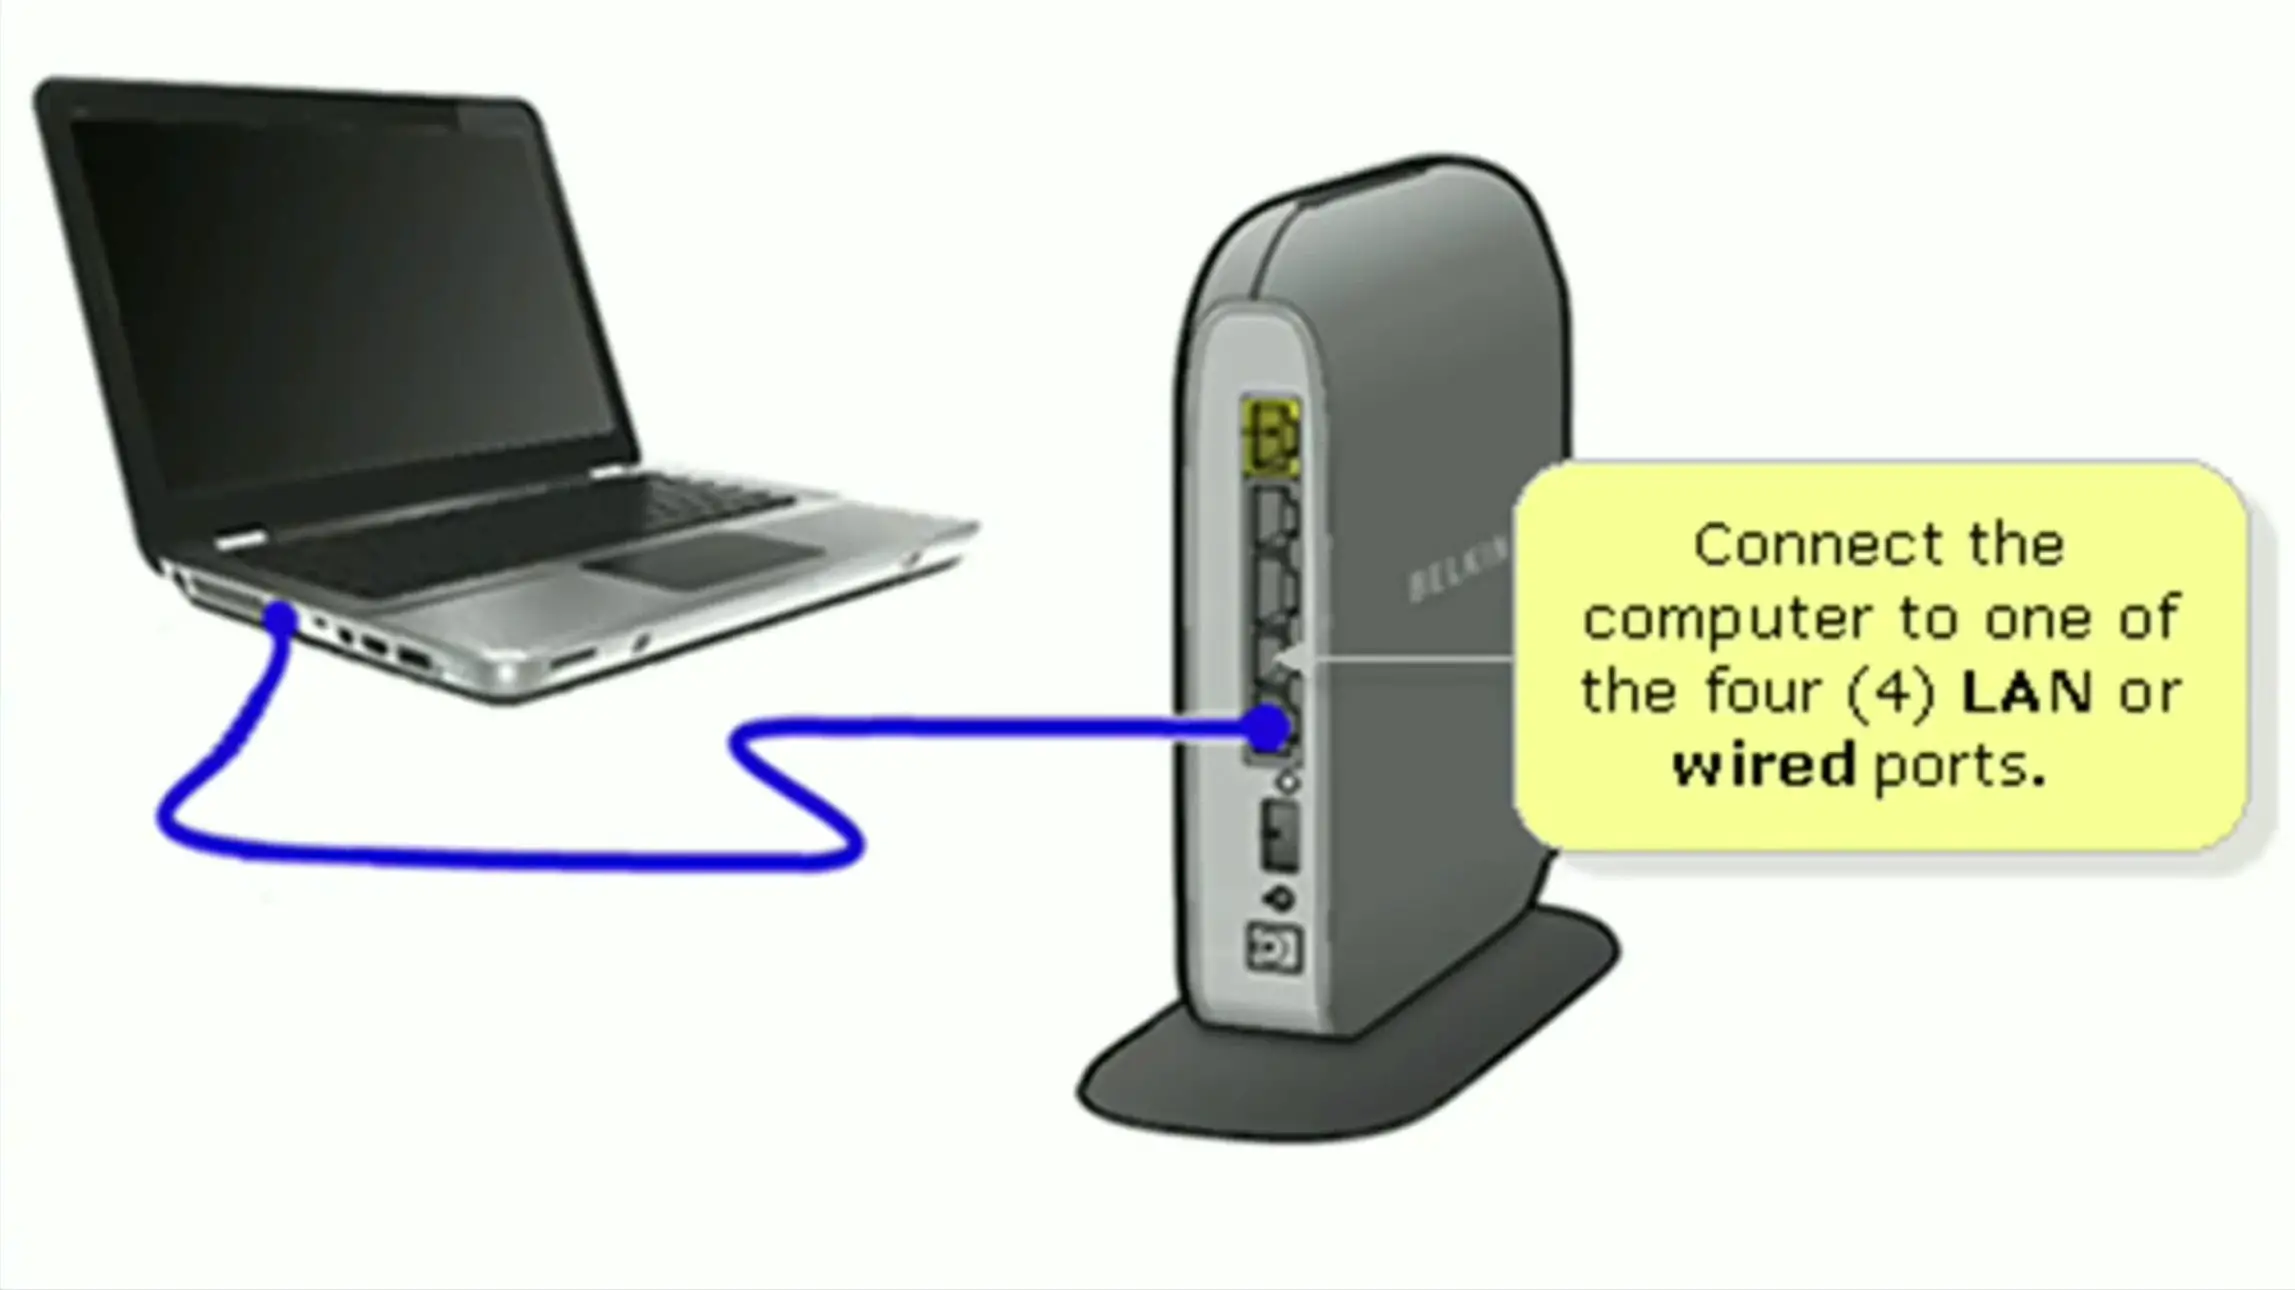 Connect the router to your computer with an Ethernet cord.